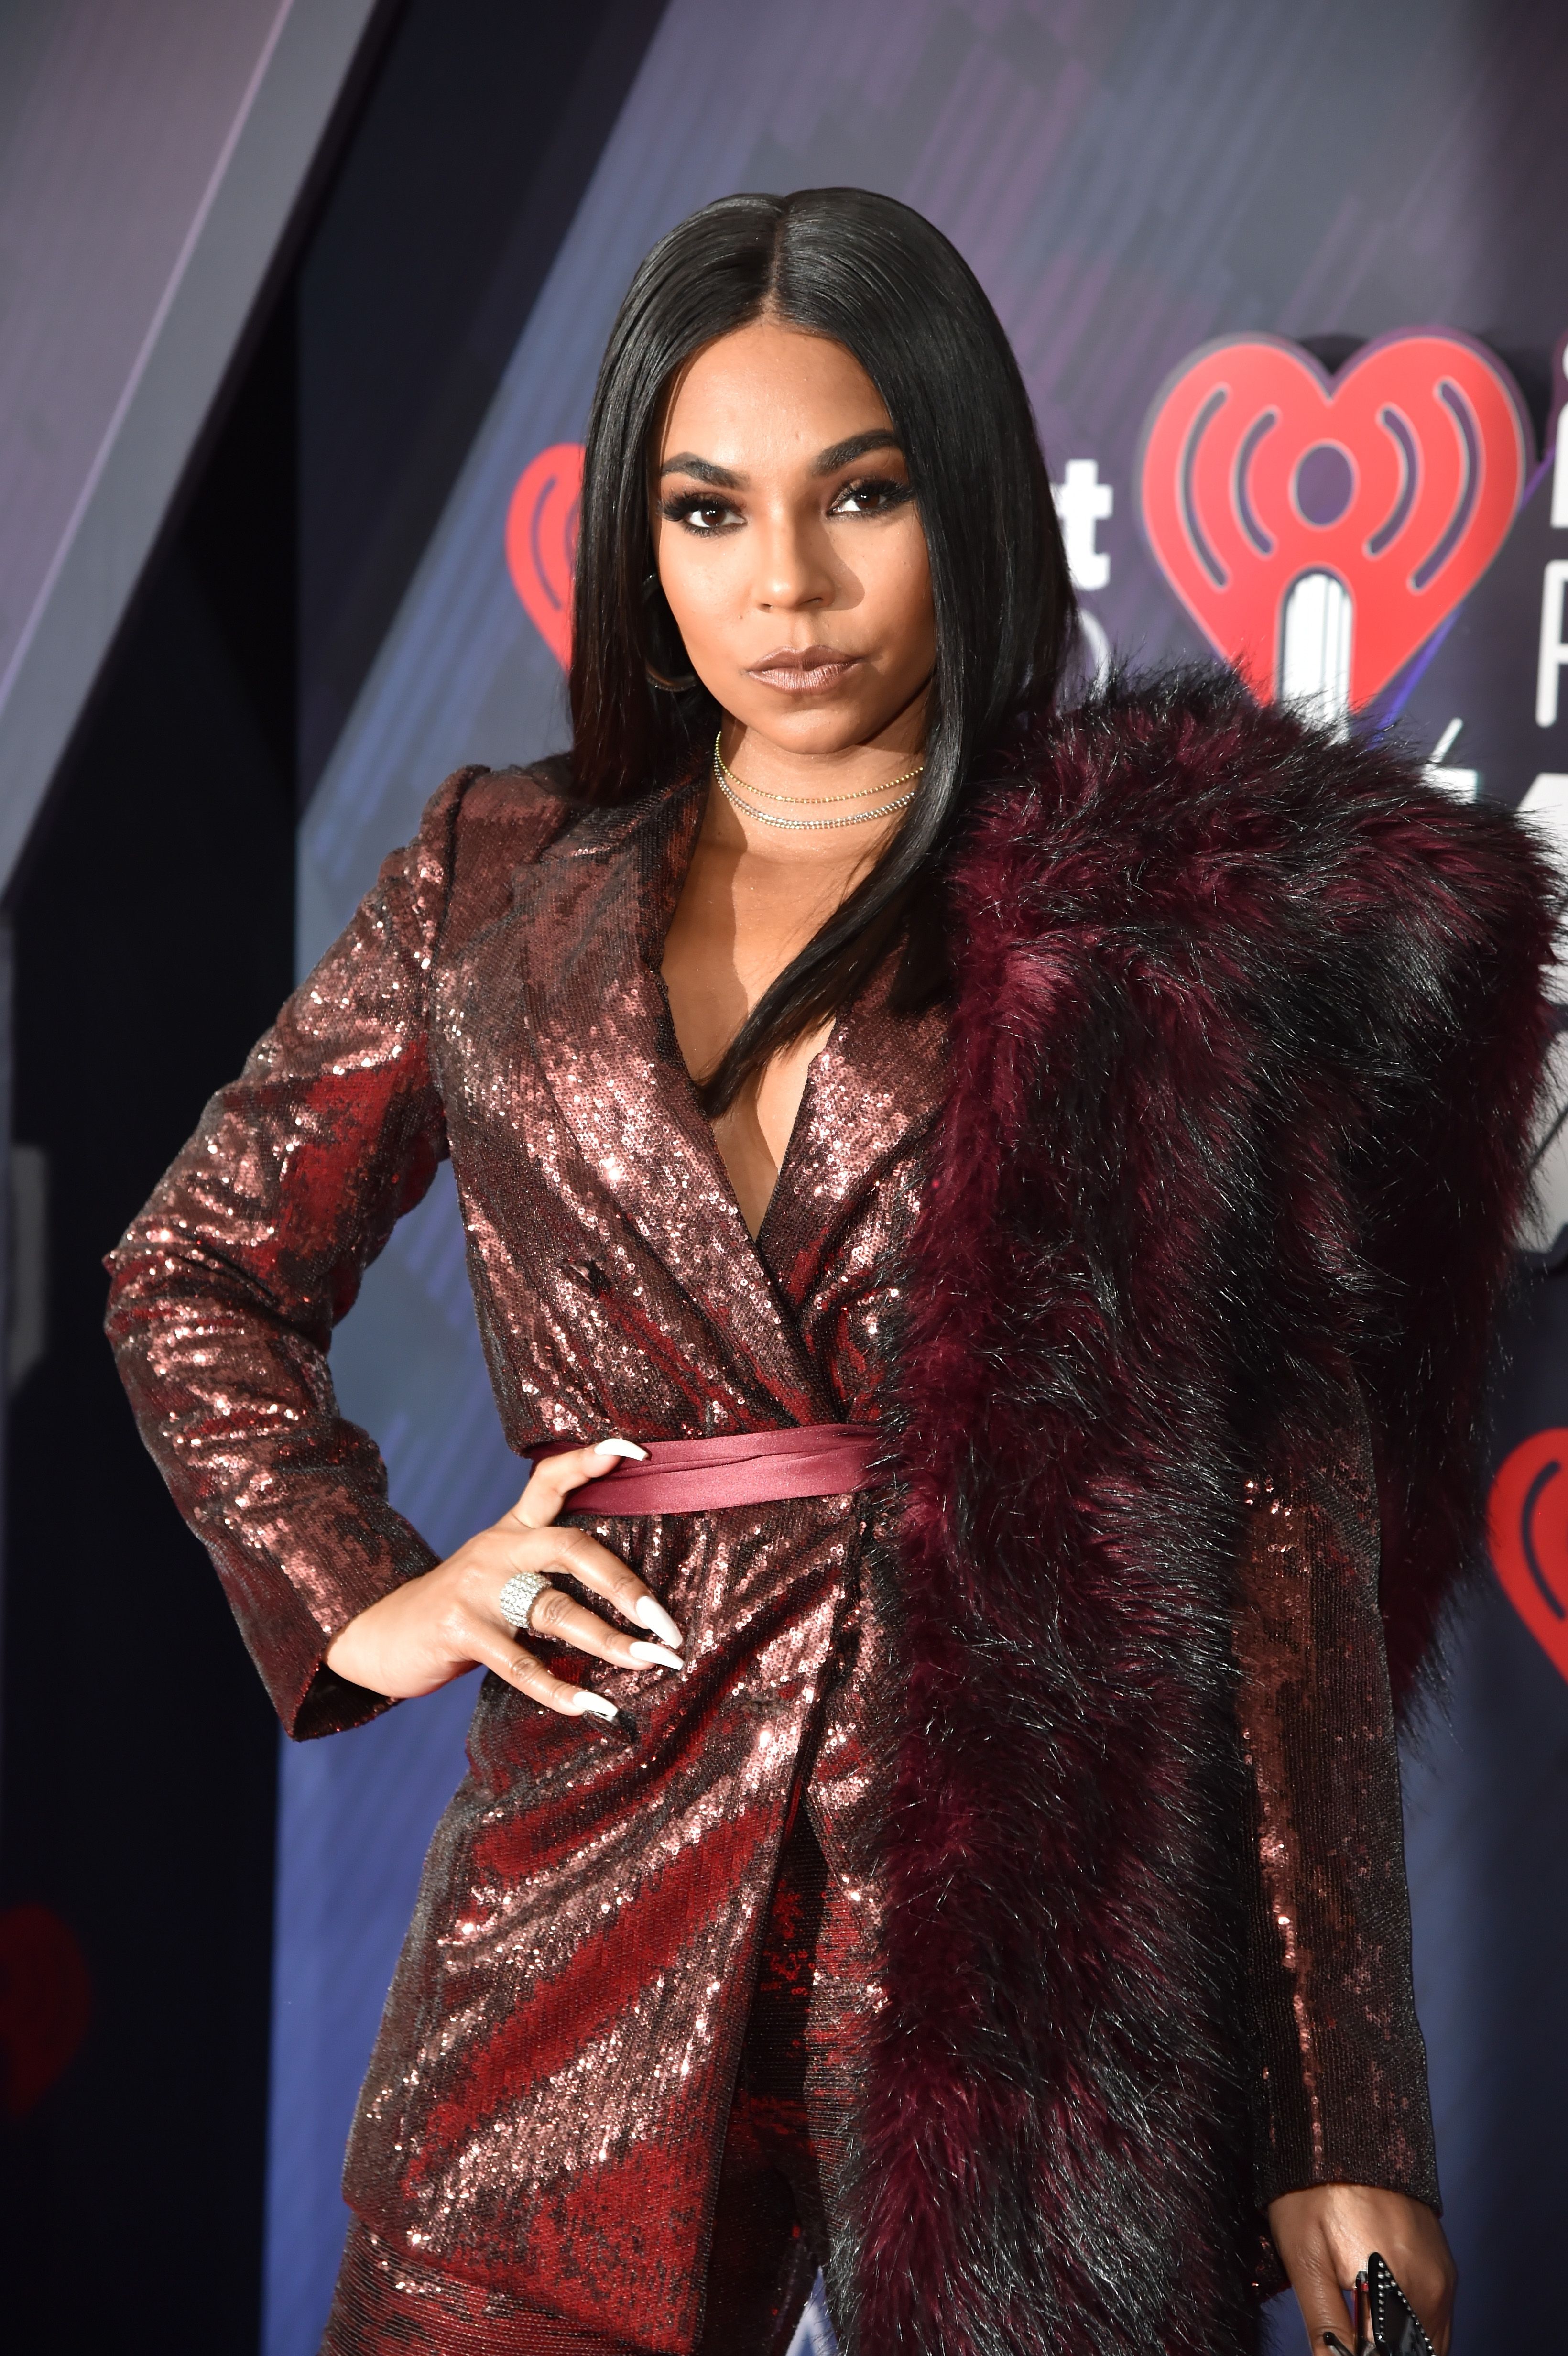 Ashanti at the 2018 iHeartRadio Music Awards in Inglewood, California | Source: Getty Images